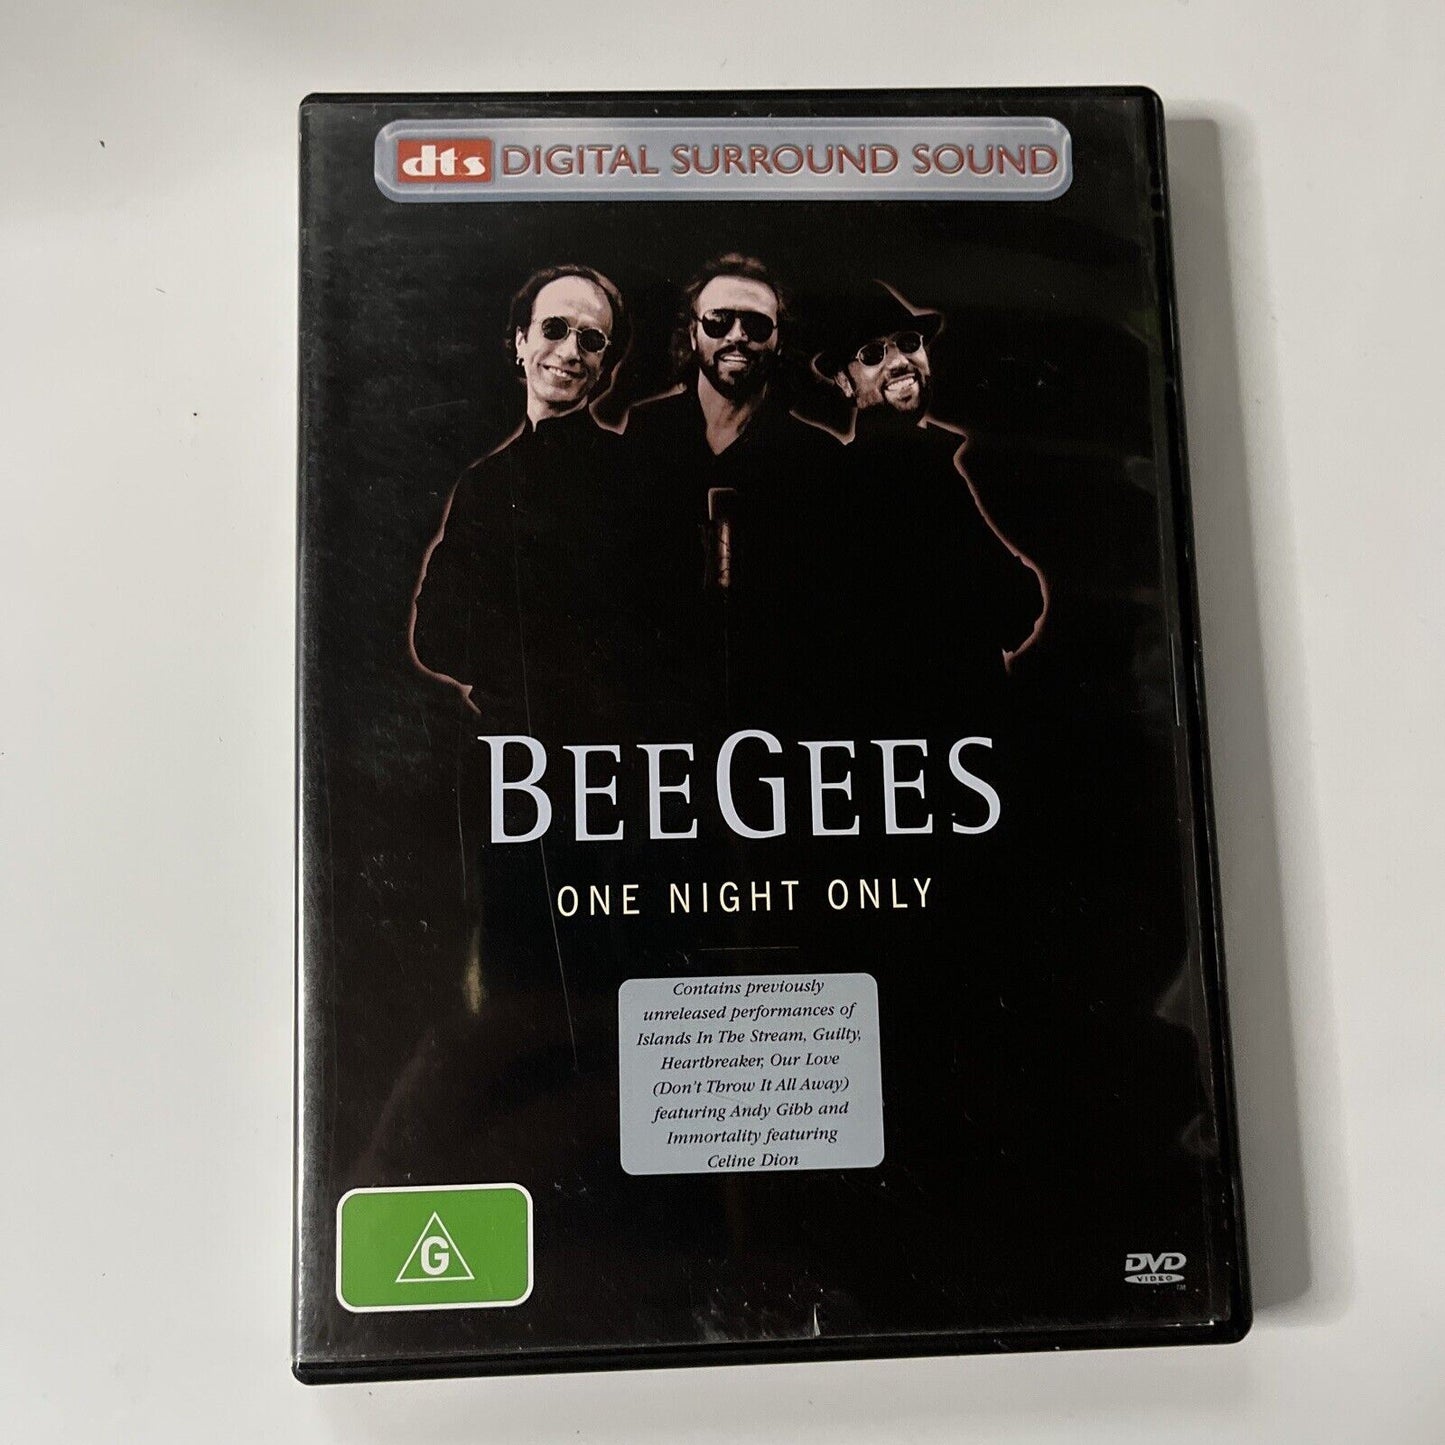 Bee Gees - One Night Only (DVD, 1997) All Regions